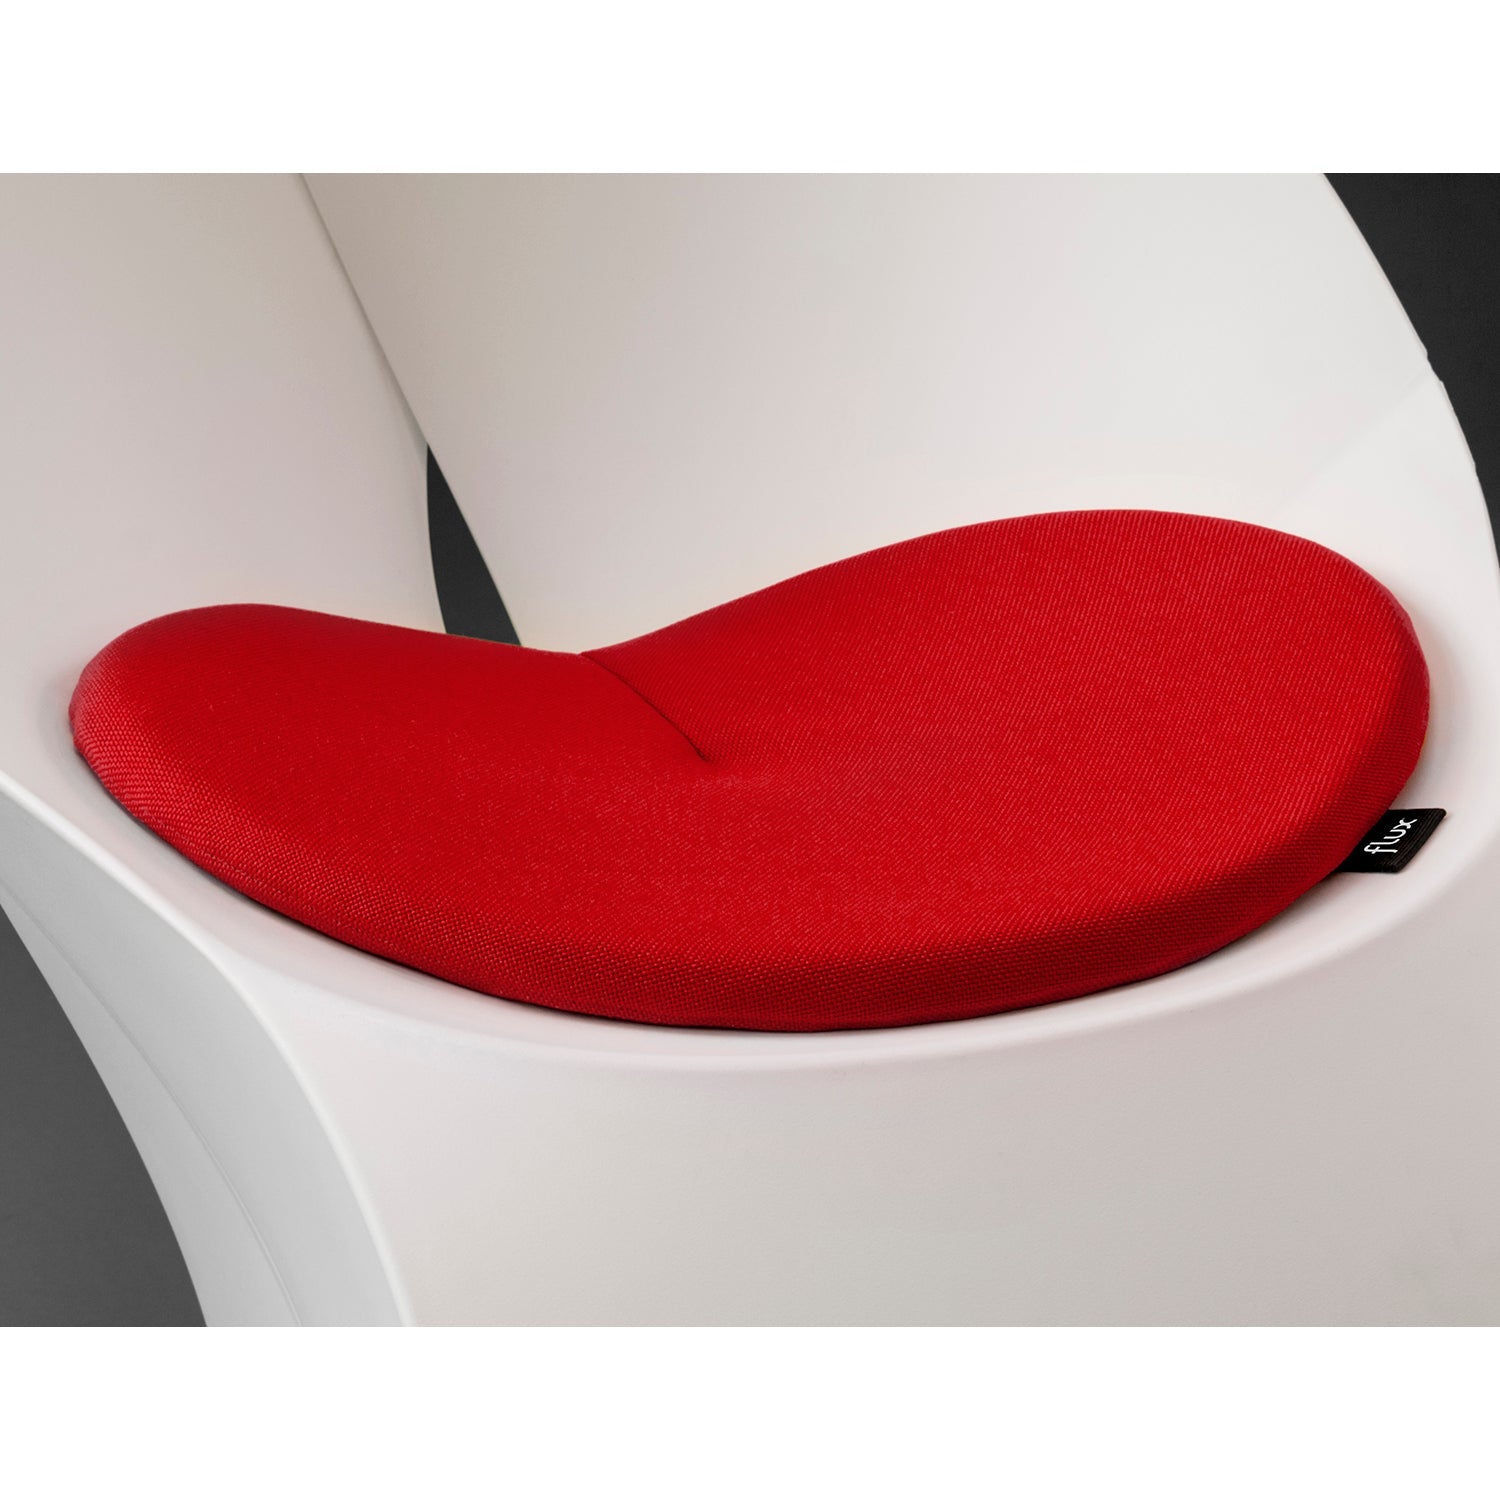 RED CUSHION FOR FLUX CHAIR